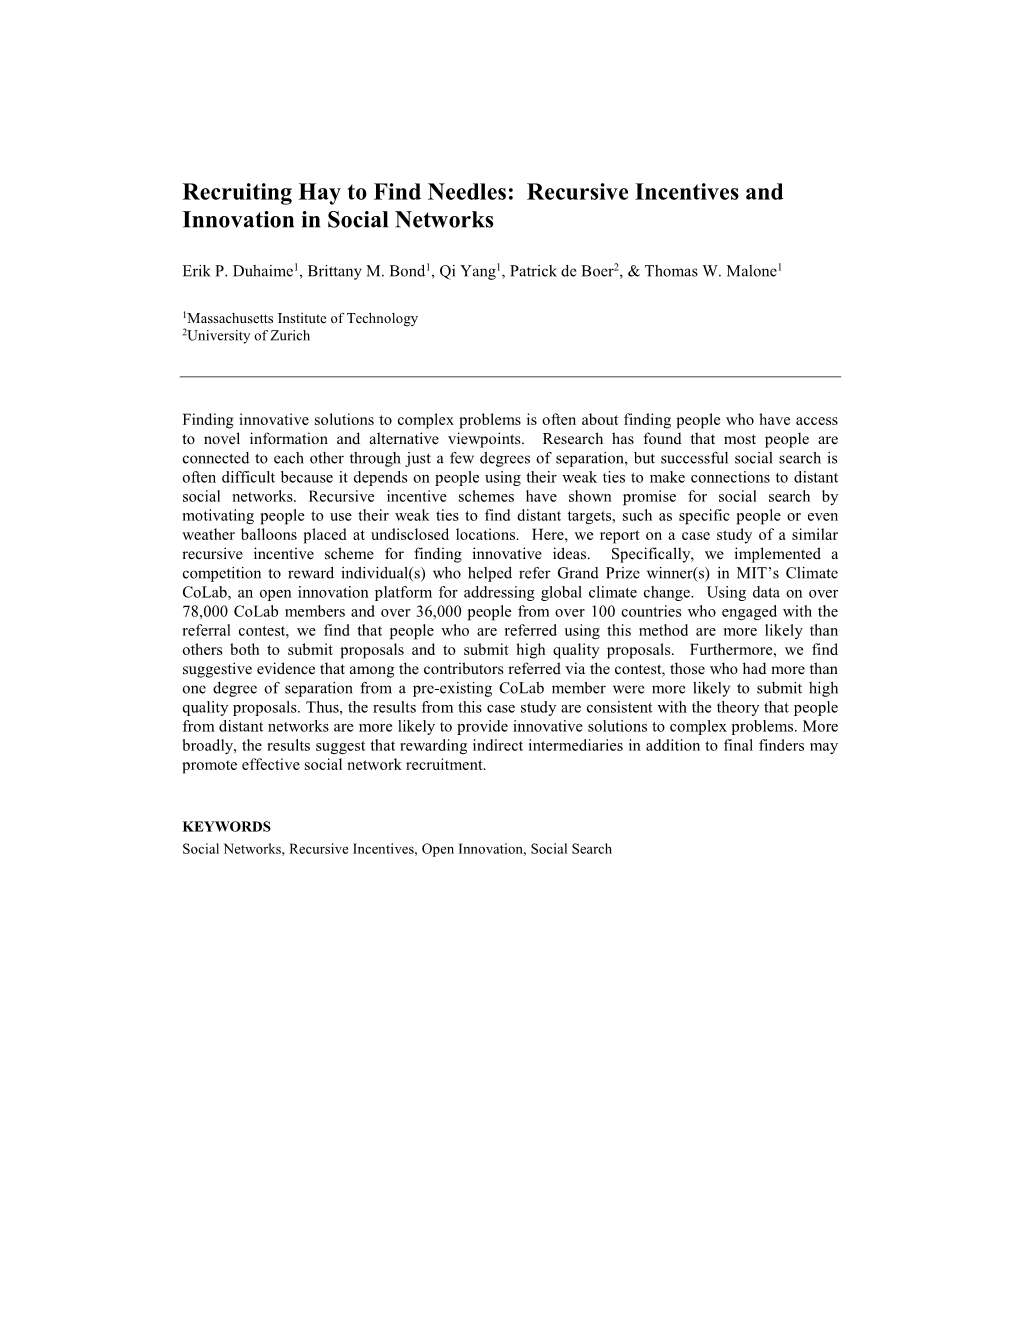 Recursive Incentives and Innovation in Social Networks